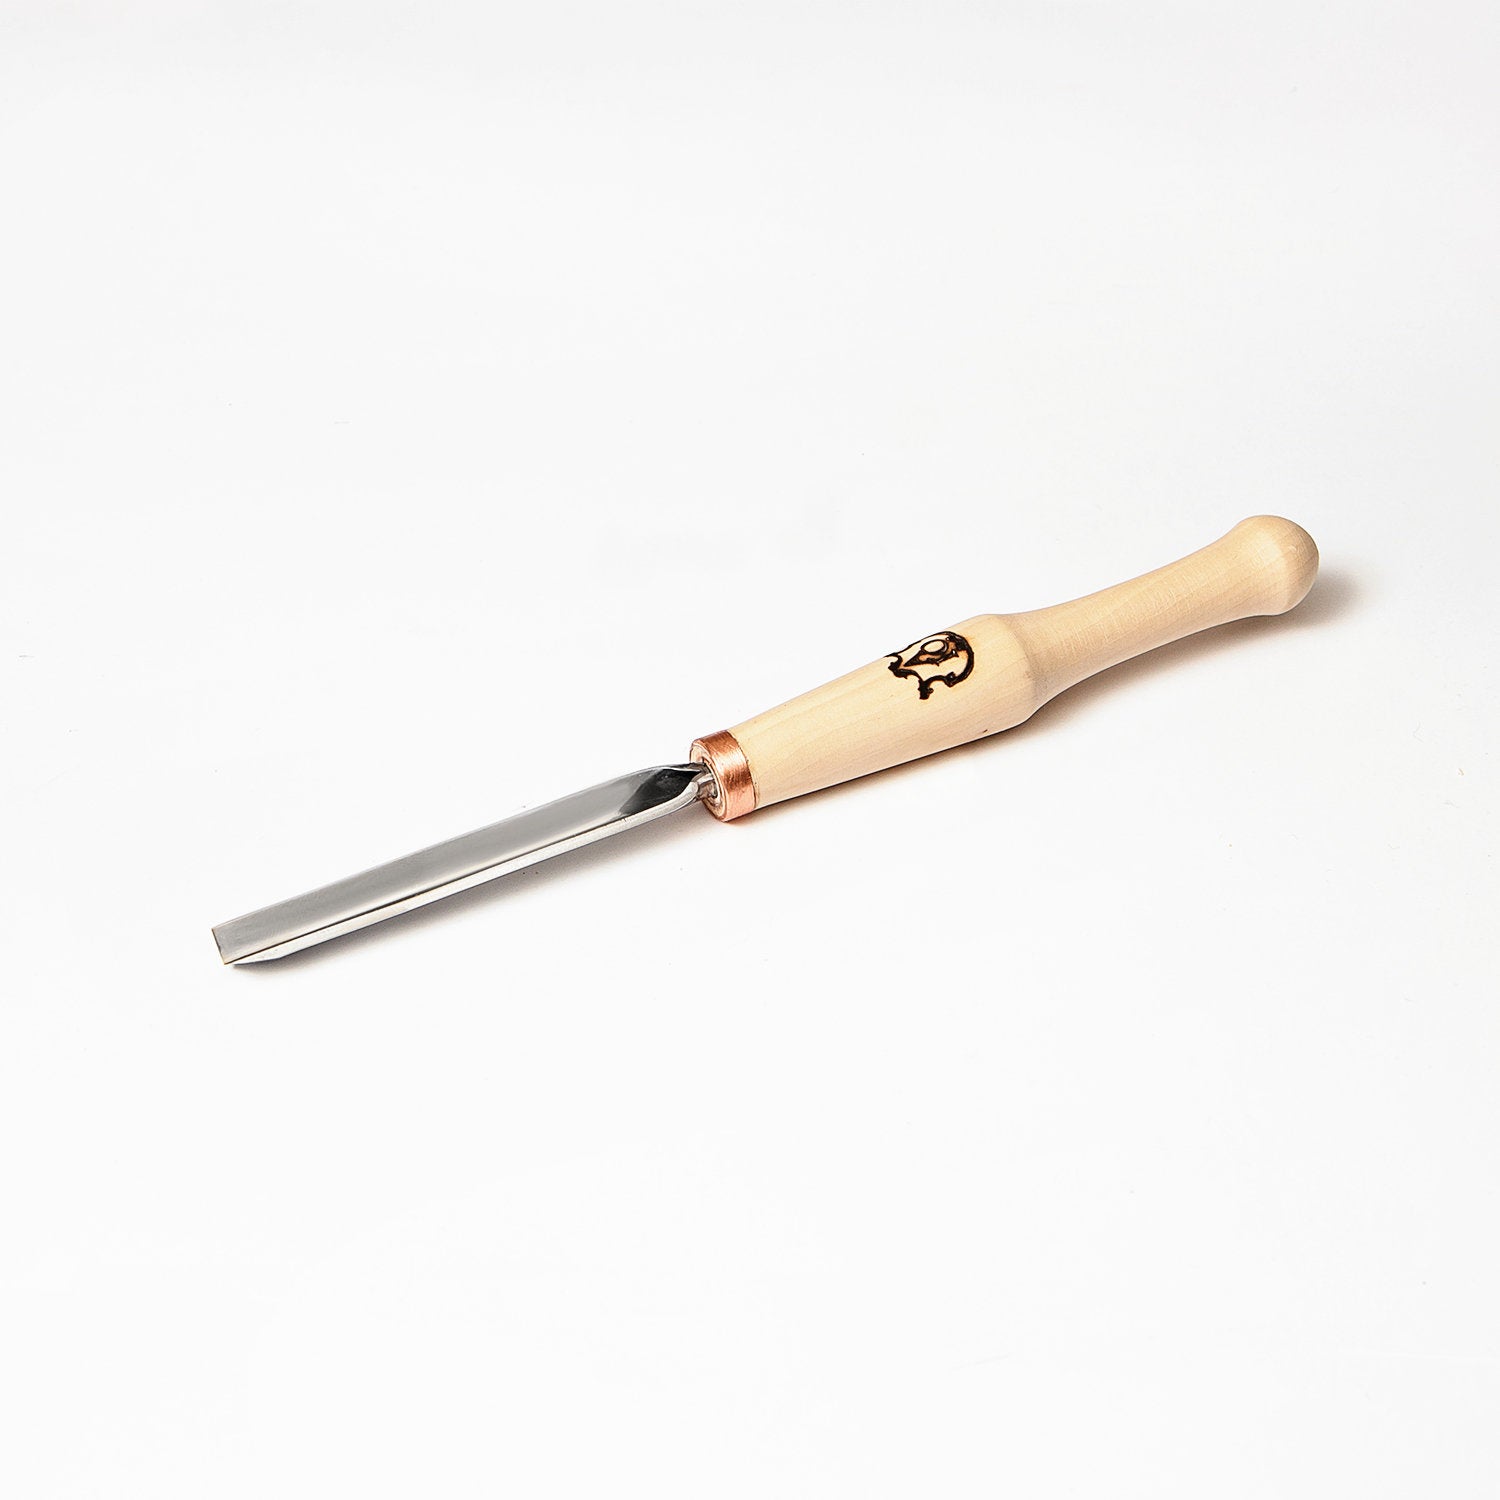 V-parting chisel for chip carving Stryi-AY Profi, knife for woodcarvin –  Wood carving tools STRYI